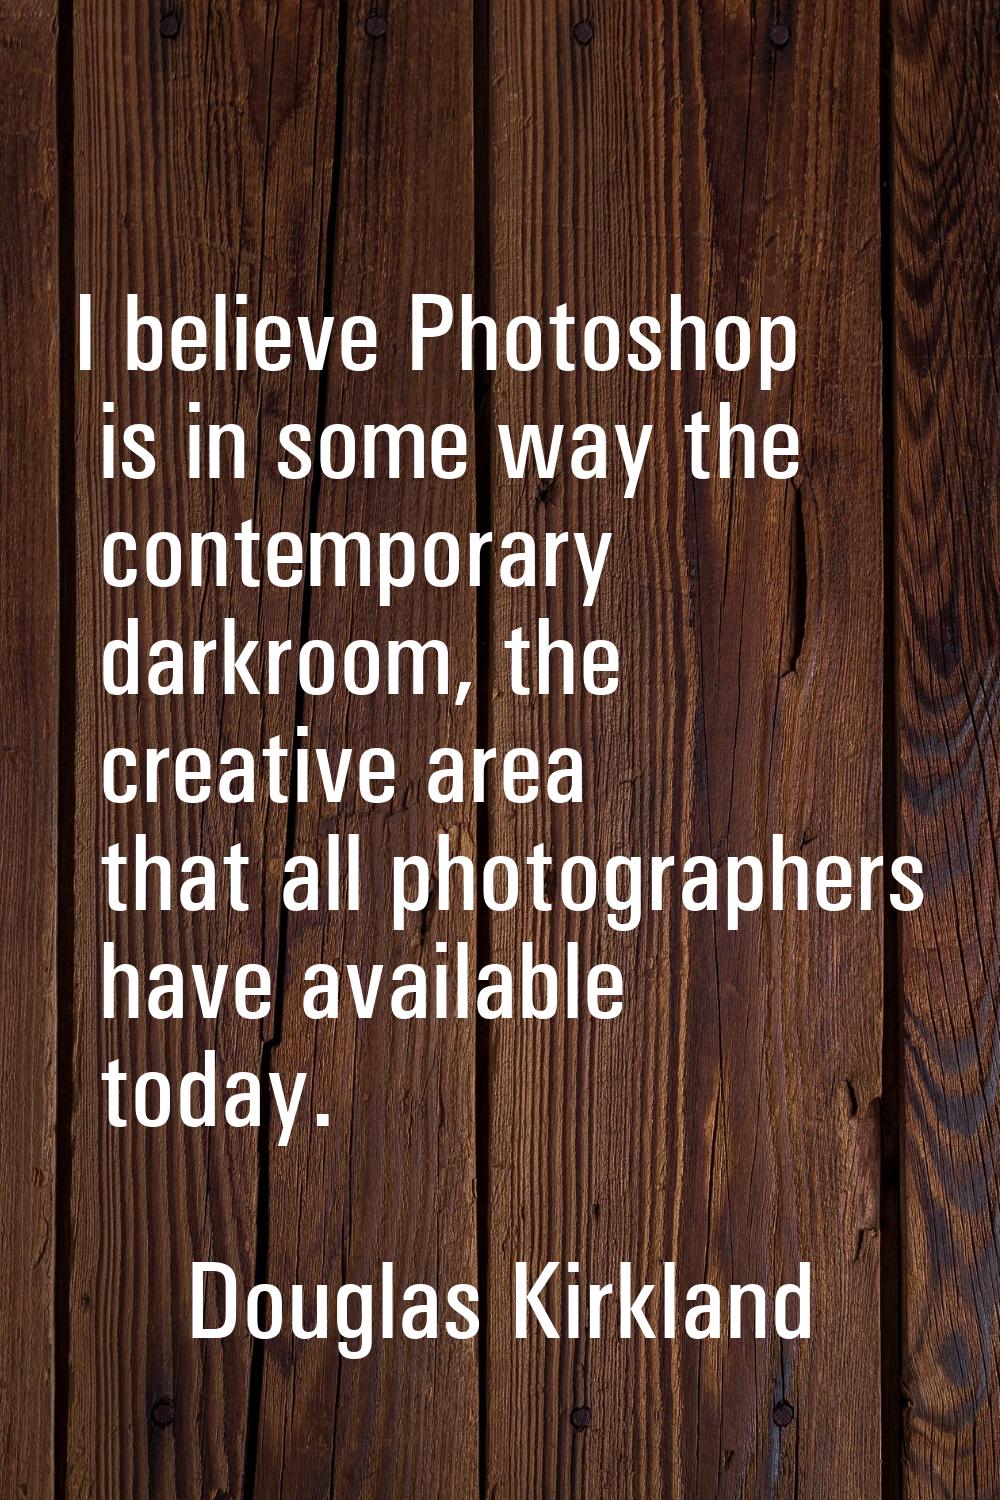 I believe Photoshop is in some way the contemporary darkroom, the creative area that all photograph